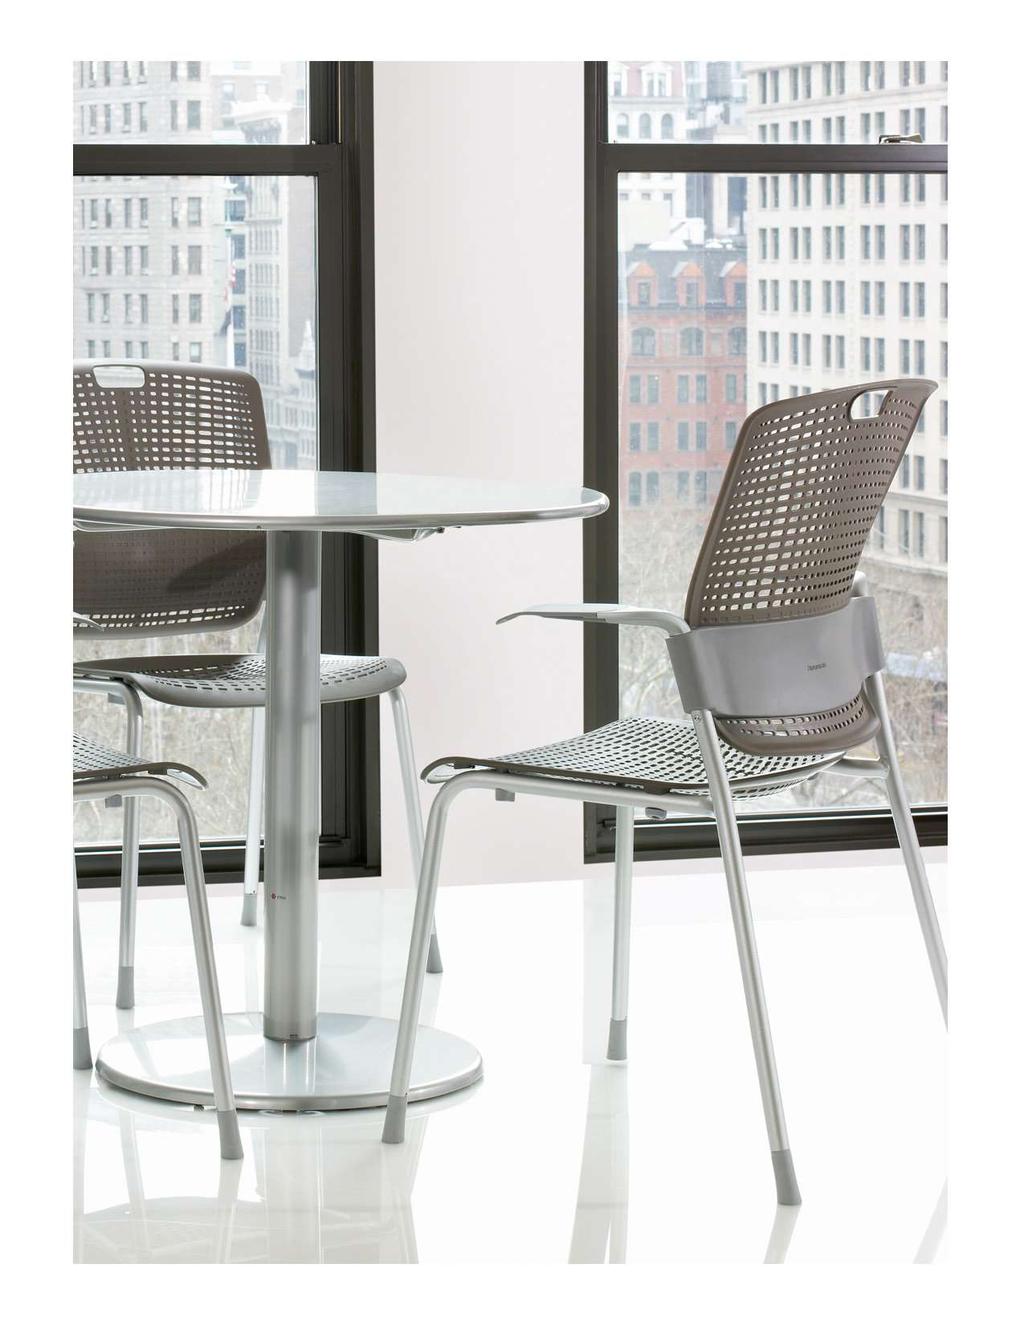 CINTO Appropriate for a wide range of commercial and residential environments, Cinto sets a new standard for ergonomic stackable seating through unique design and manufacturing innovations.